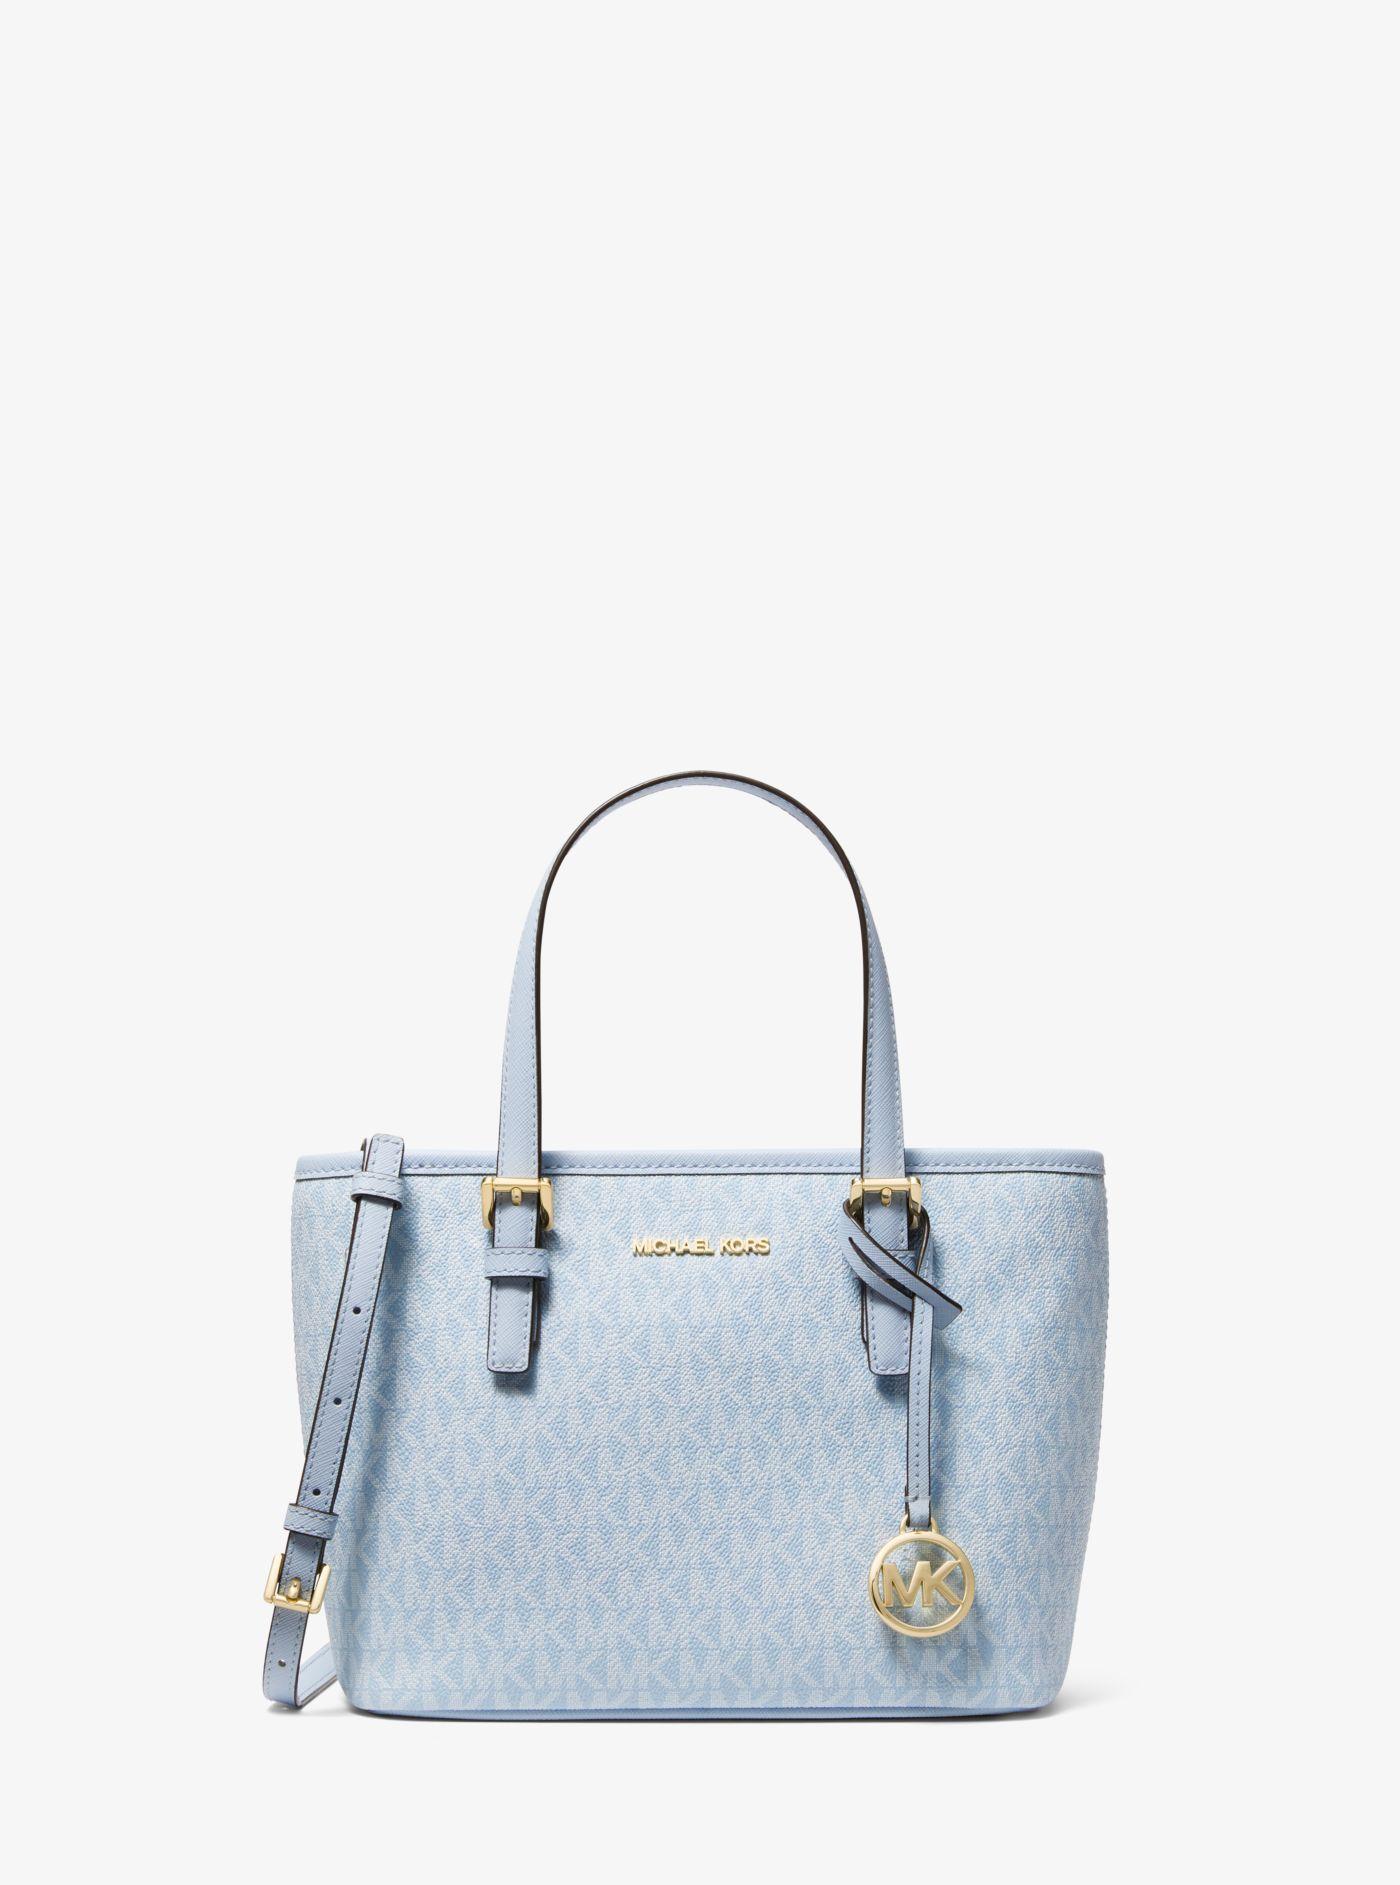 Michael Kors Jet Set Travel Extra-small Logo Top-zip Tote Bag in Blue | Lyst